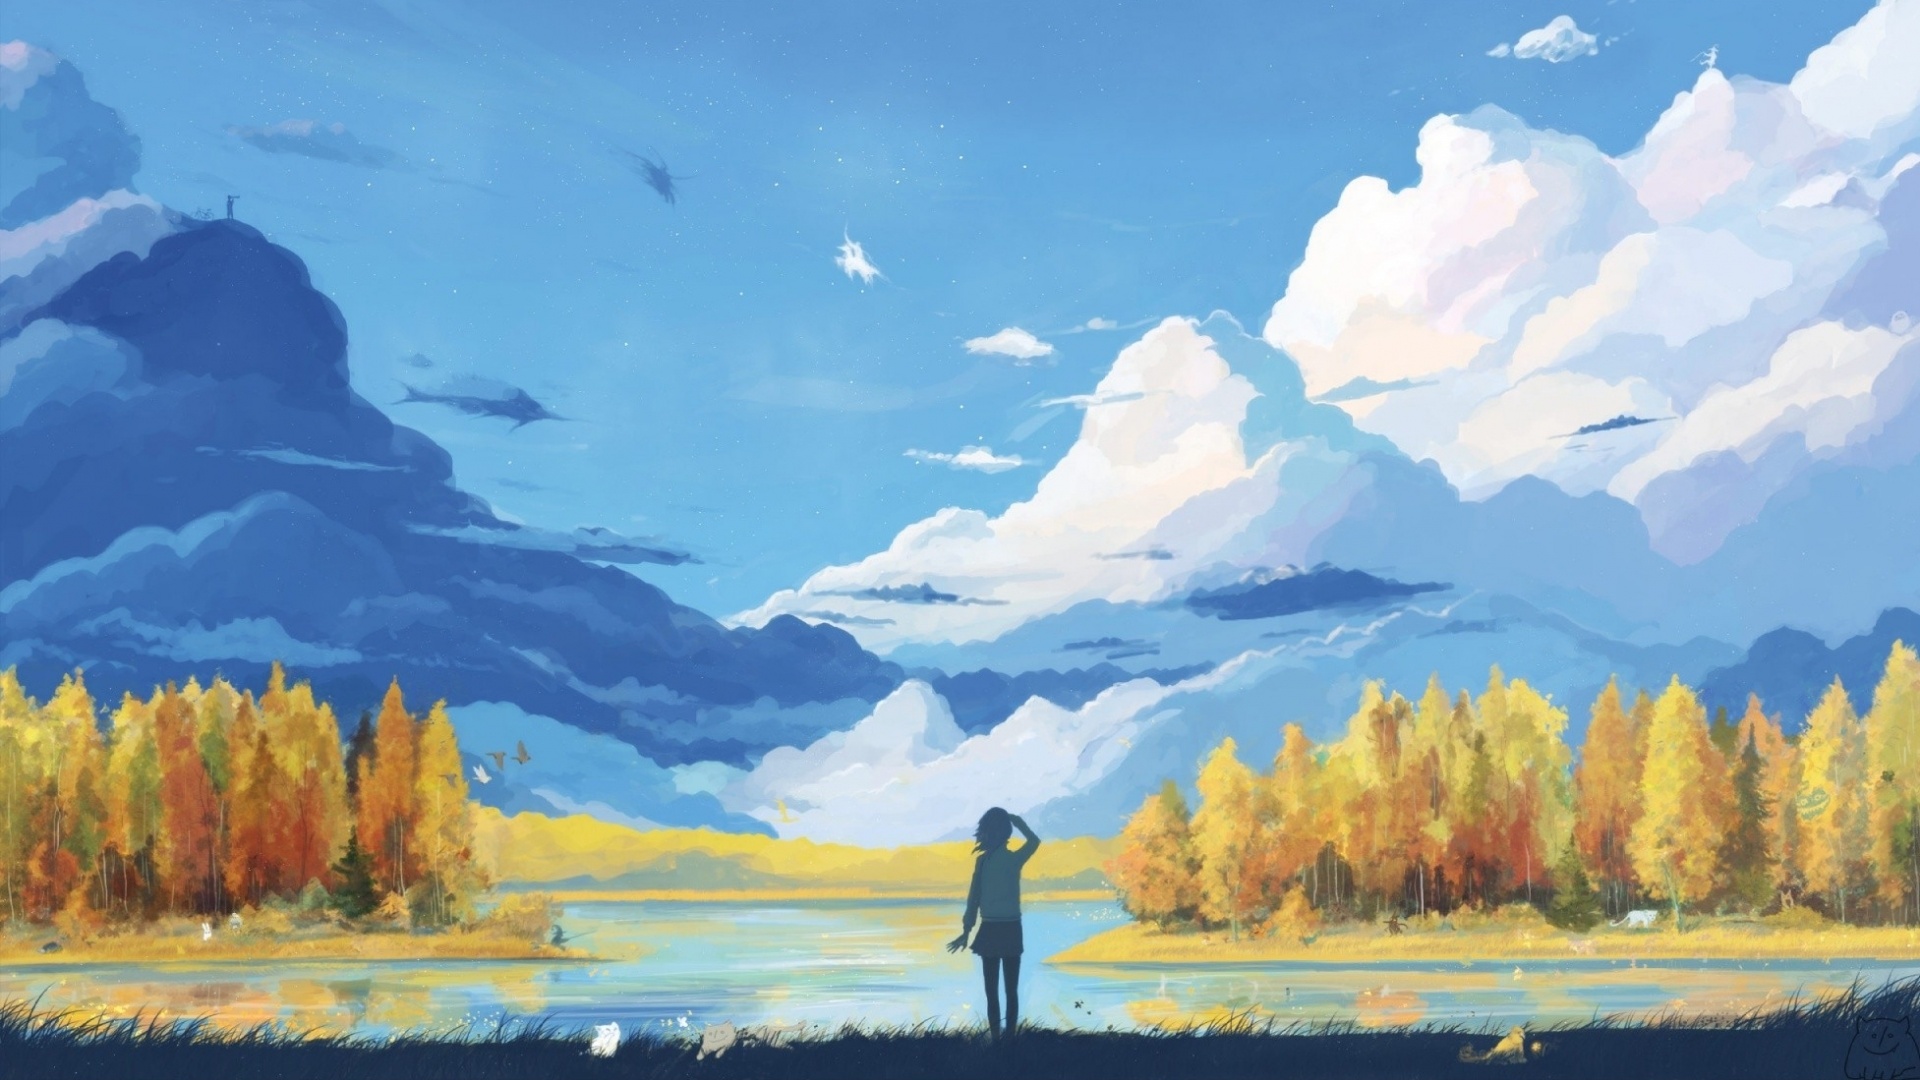 Anime landscape wallpapers